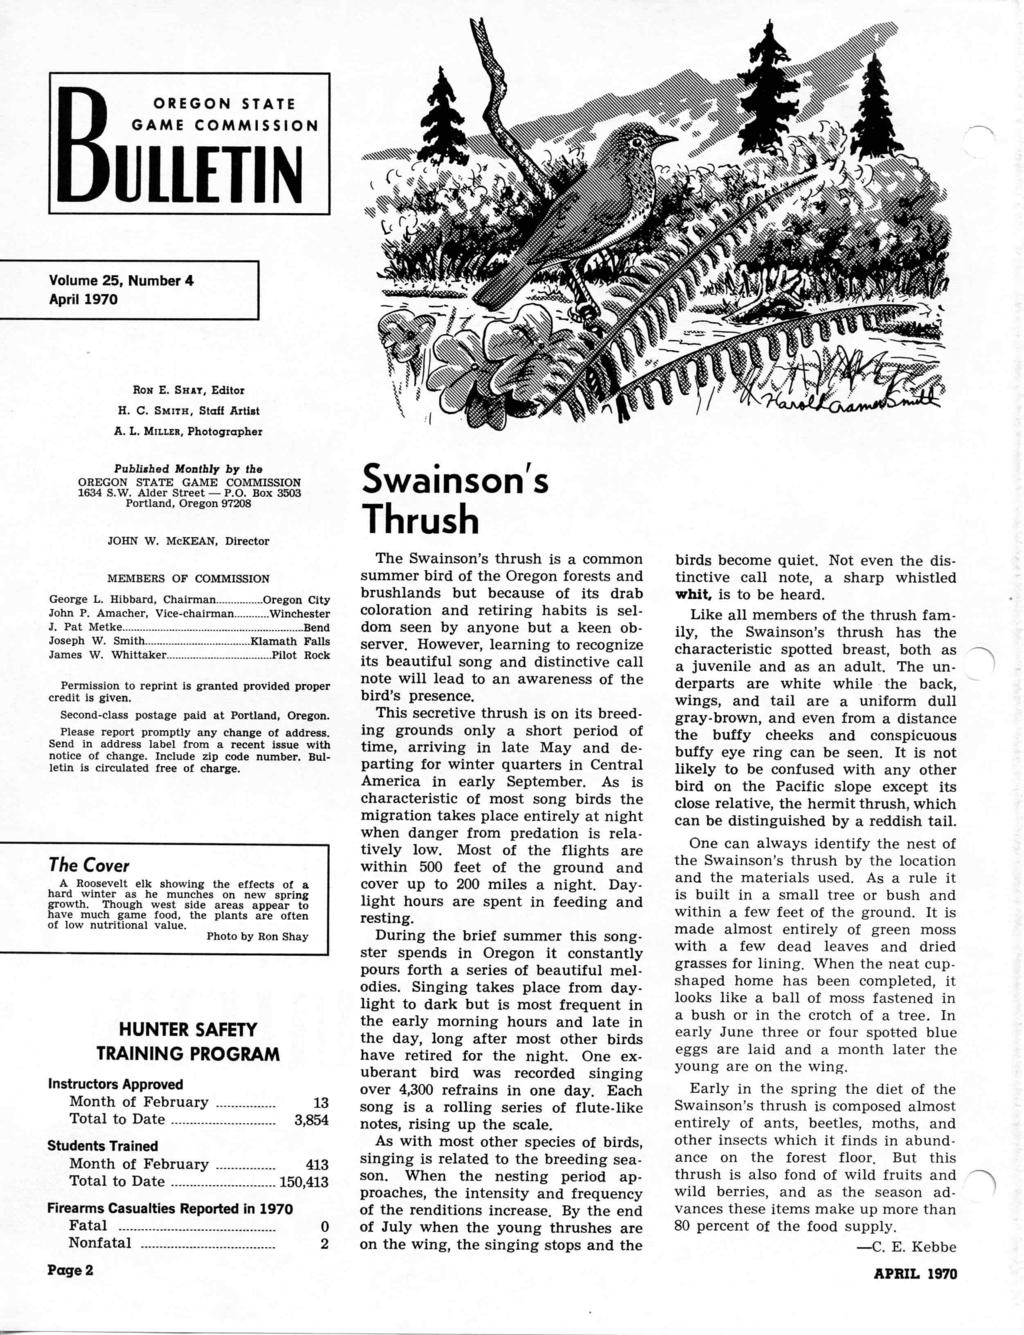 STATE GAME COMMISSION ULLETIN Volume 25, Number 4 April 1970 Hof; E. SHAY, Editor H. C. SMITH, Staff Artist A. L. MILLER, Photographer Published Monthly by the OREGON STATE GAME COMMISSION 1634 S.W.